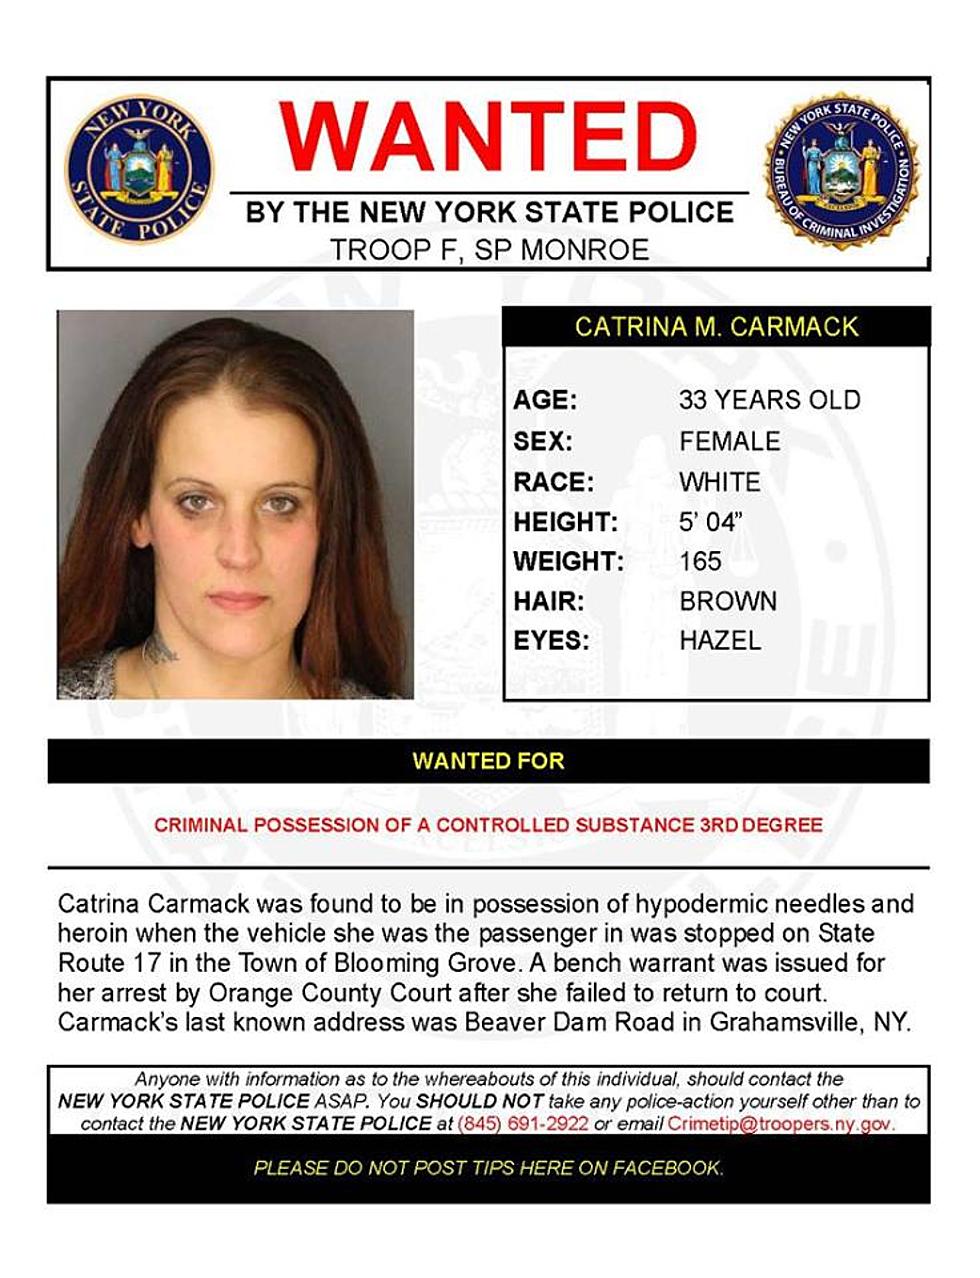 Warrant Wednesday: Sullivan County Woman Wanted for Possession of Controlled Substance